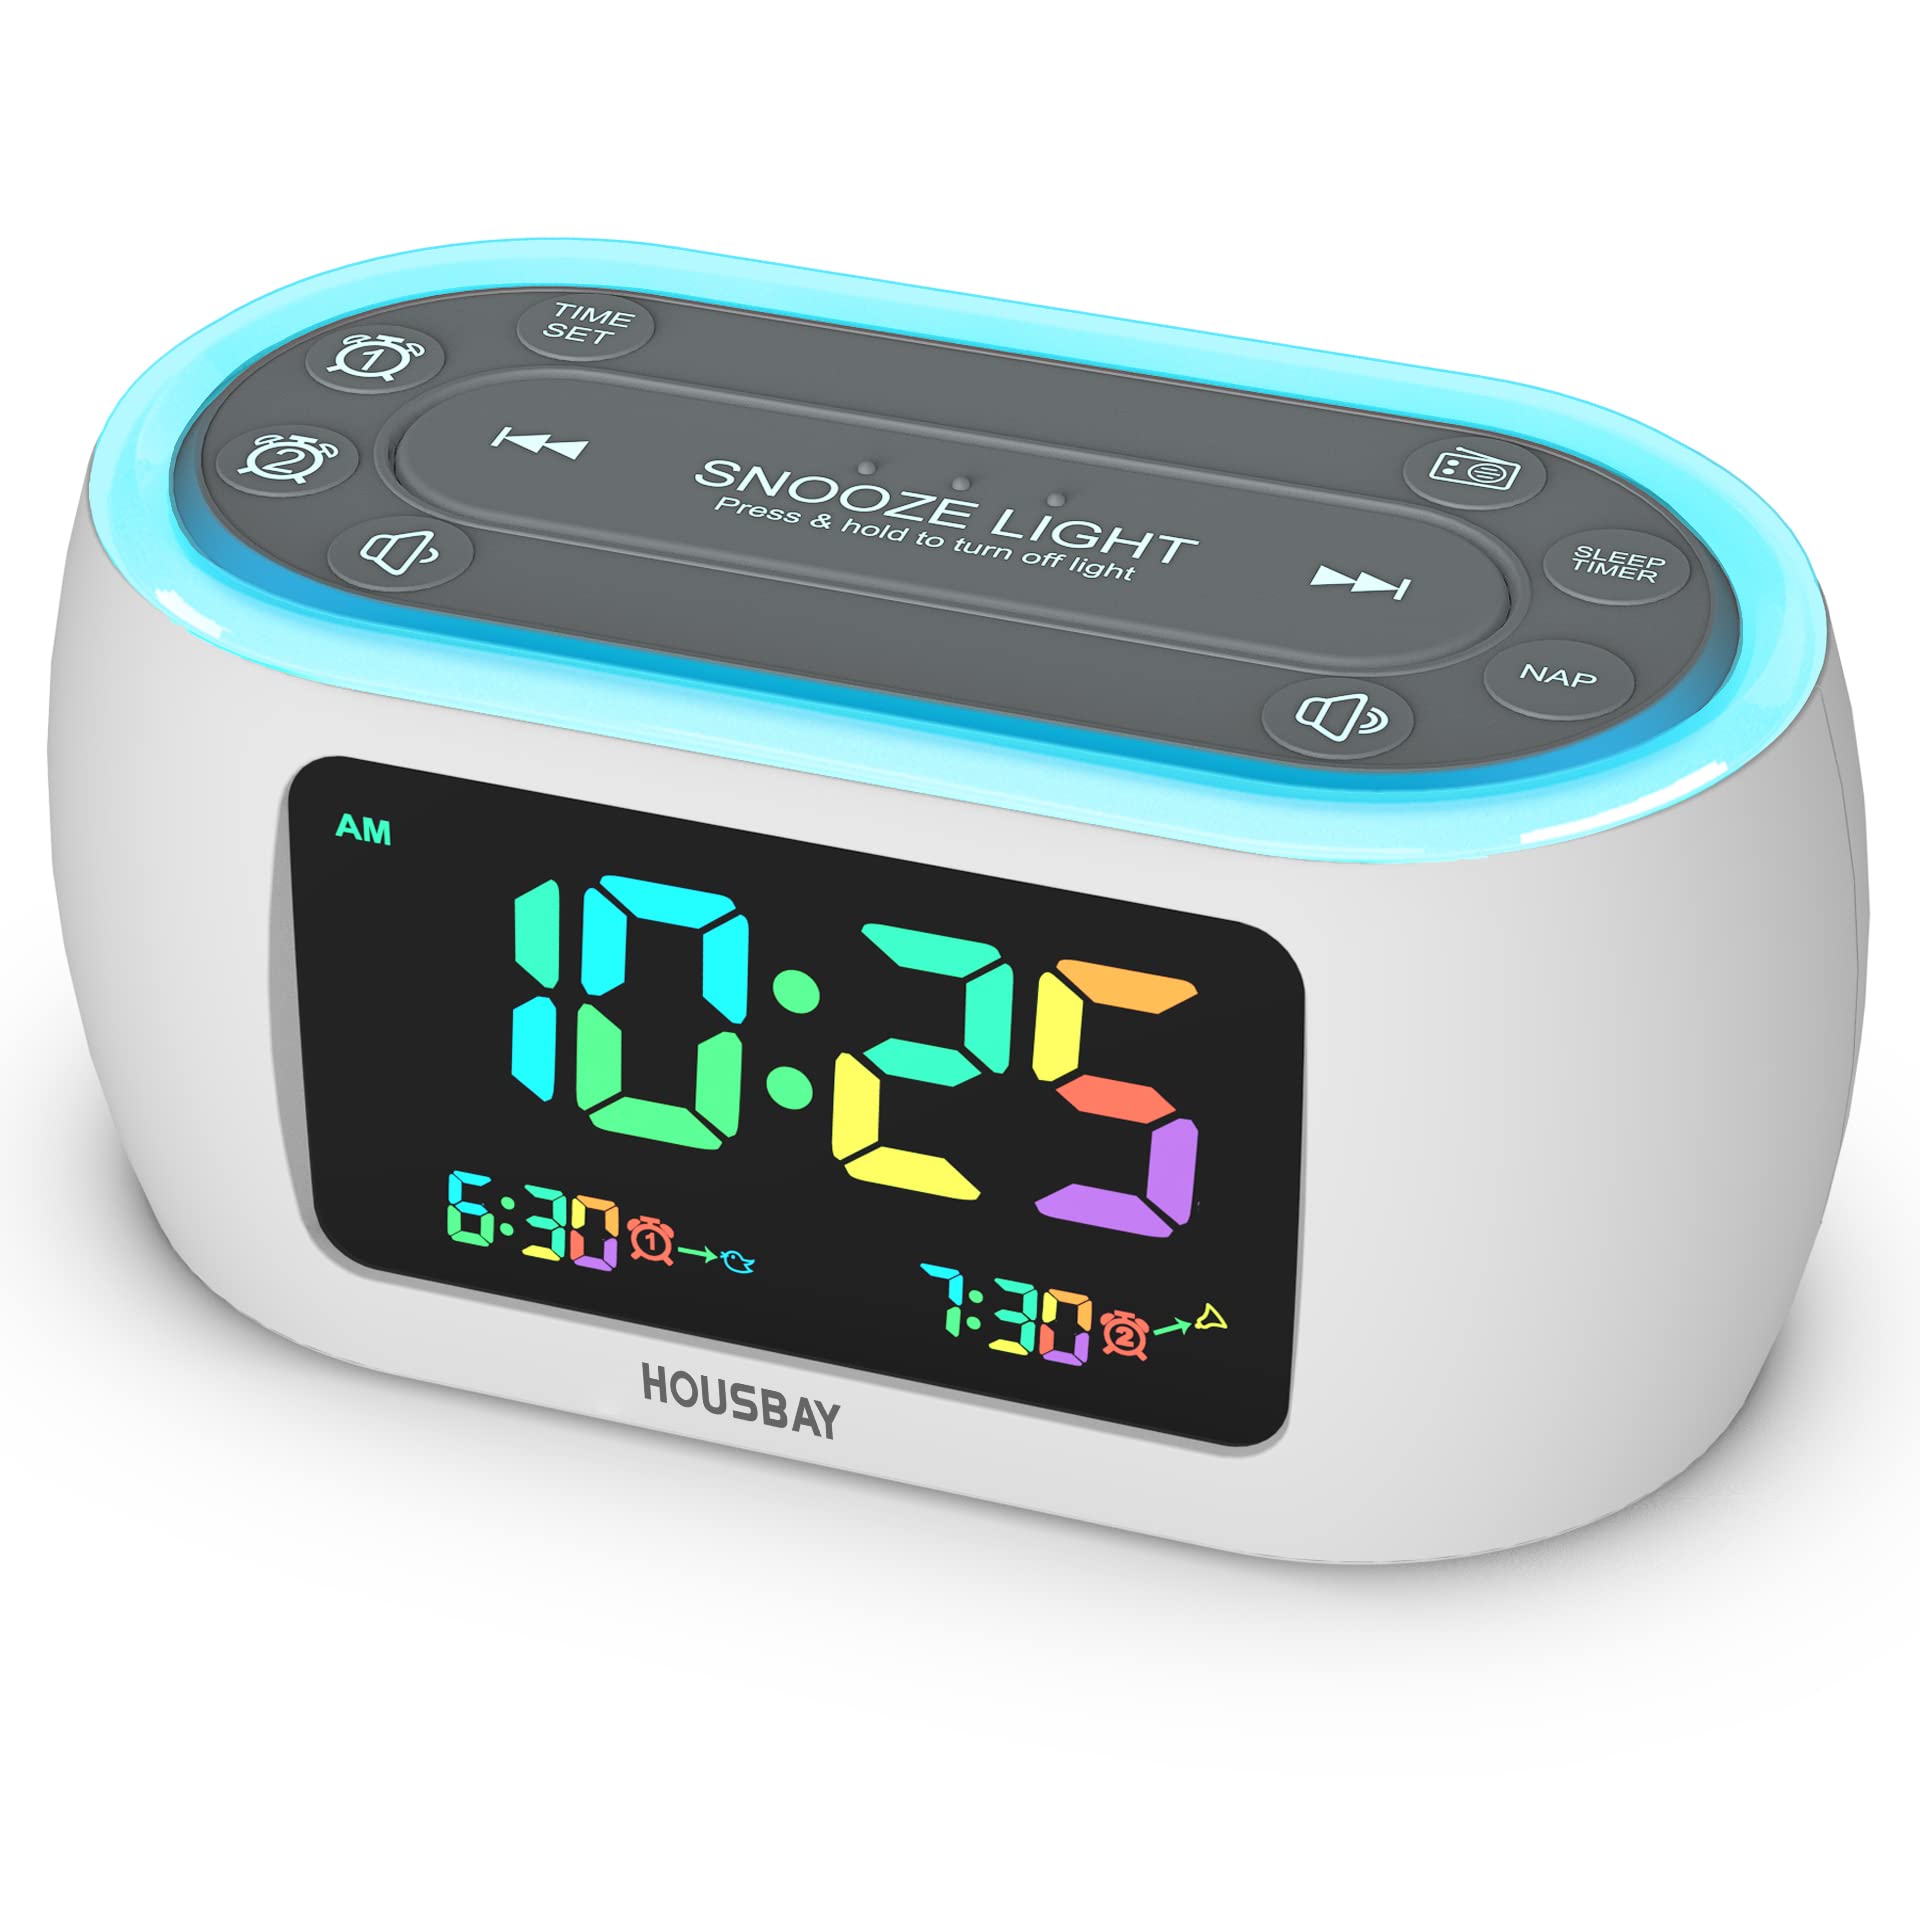 HOUSBAY Glow Small Colorful Alarm Clock Radio with Rainbow Digit, 7 Color Night Light with ON/Off Options, Dual Alarm, Dimmer, FM Radio with SleepTimer for Bedrooms White+colorful Digit